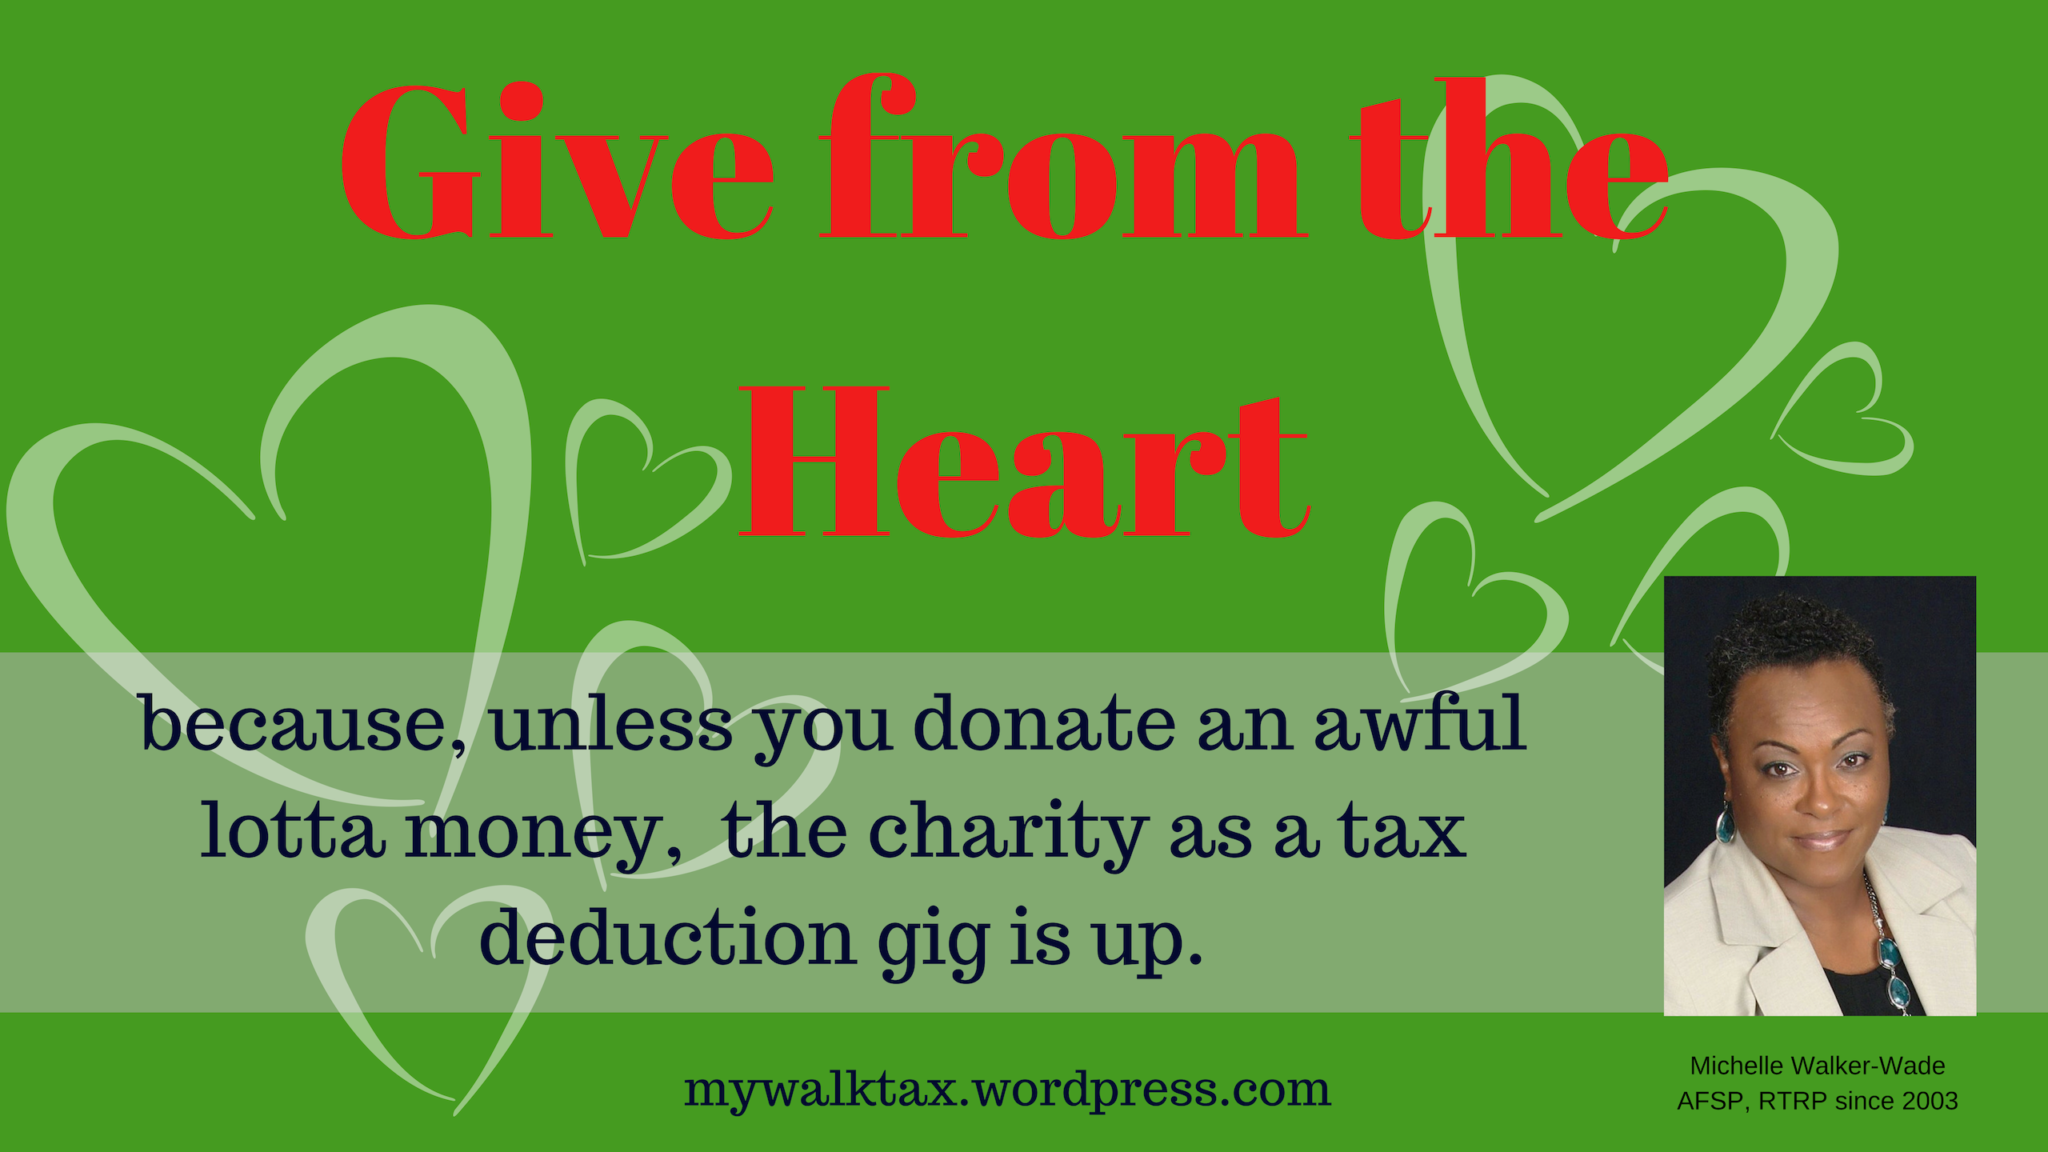 Do You Make Charitable Contributions From Your Business??? Well Done